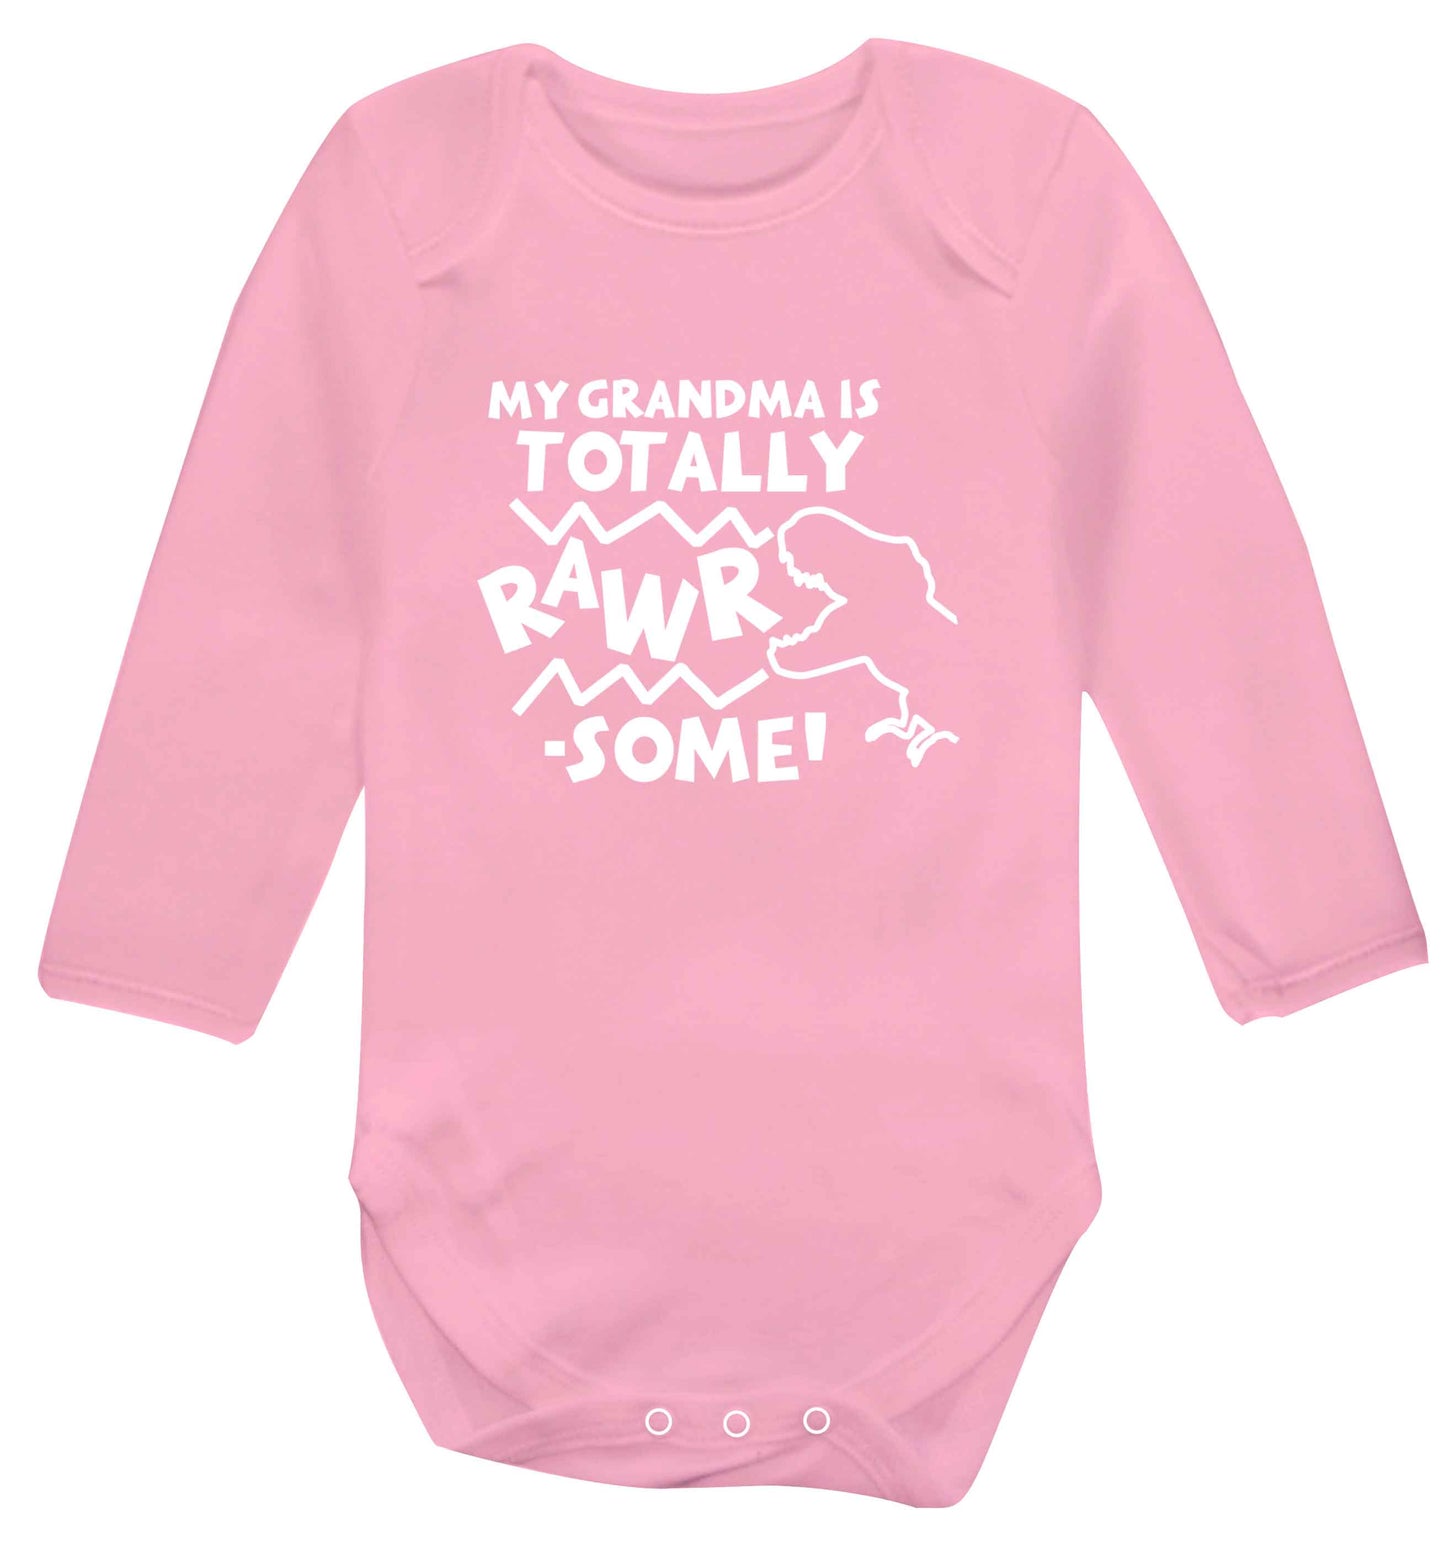 My grandma is totally rawrsome baby vest long sleeved pale pink 6-12 months